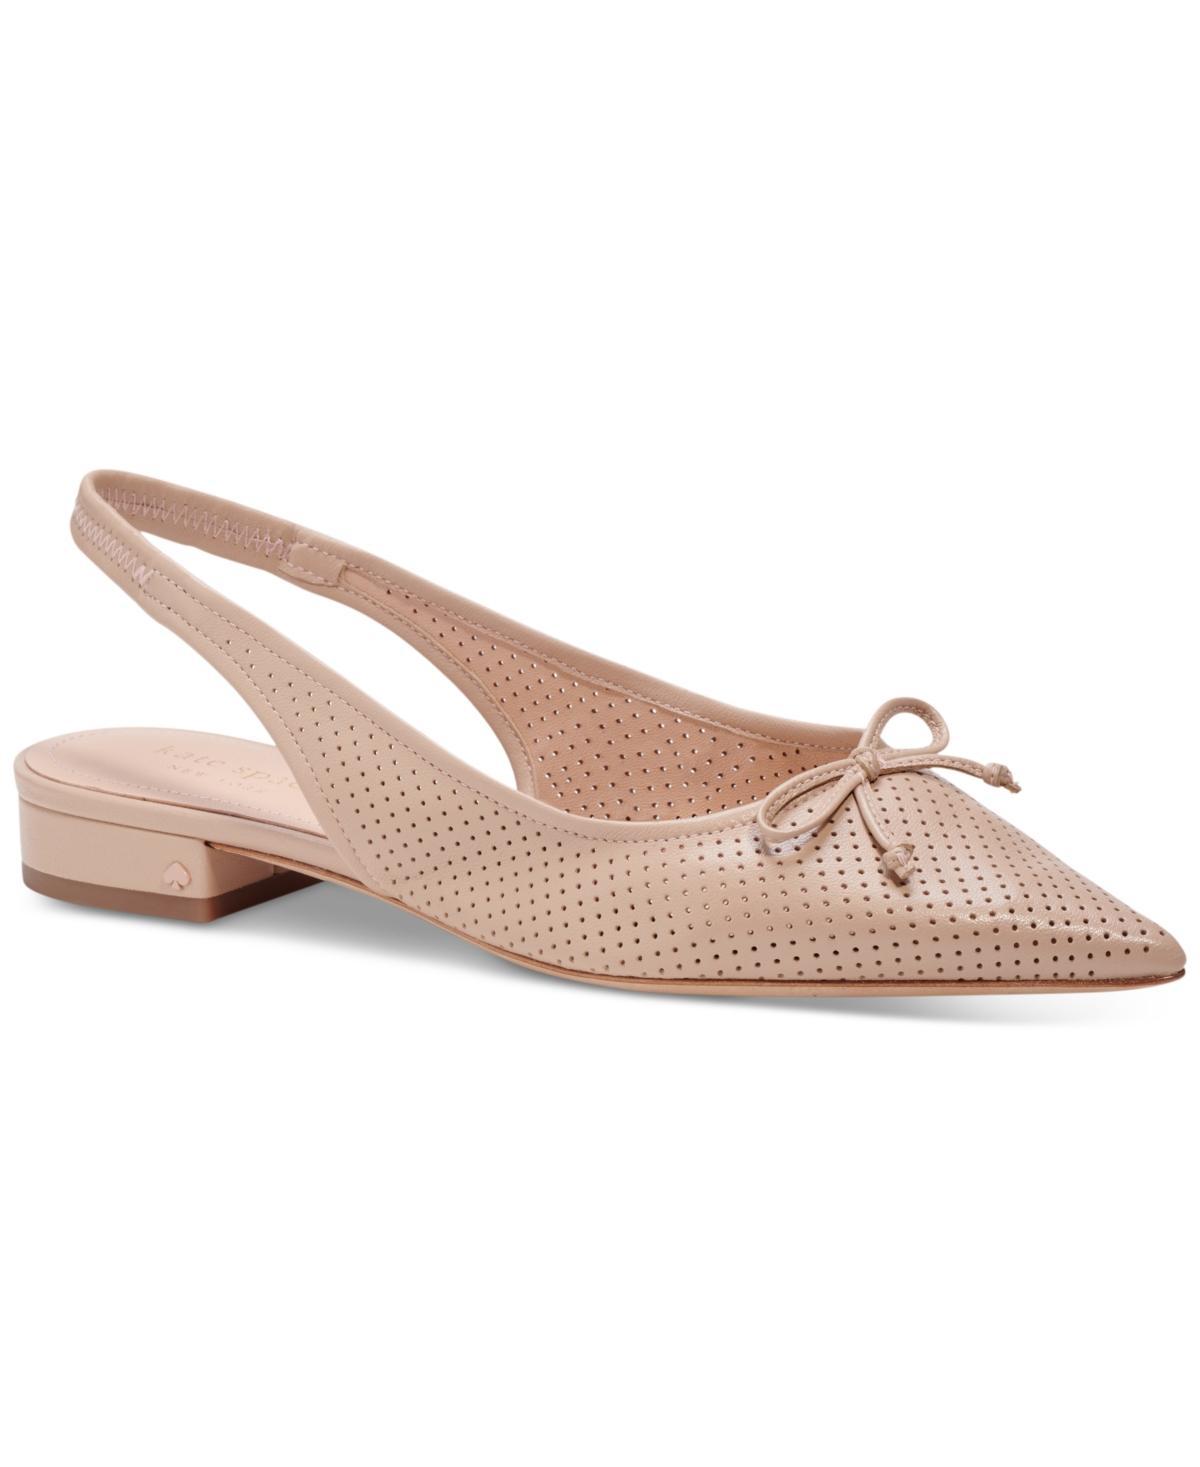 Kate Spade New York Womens Veronica Flats Product Image